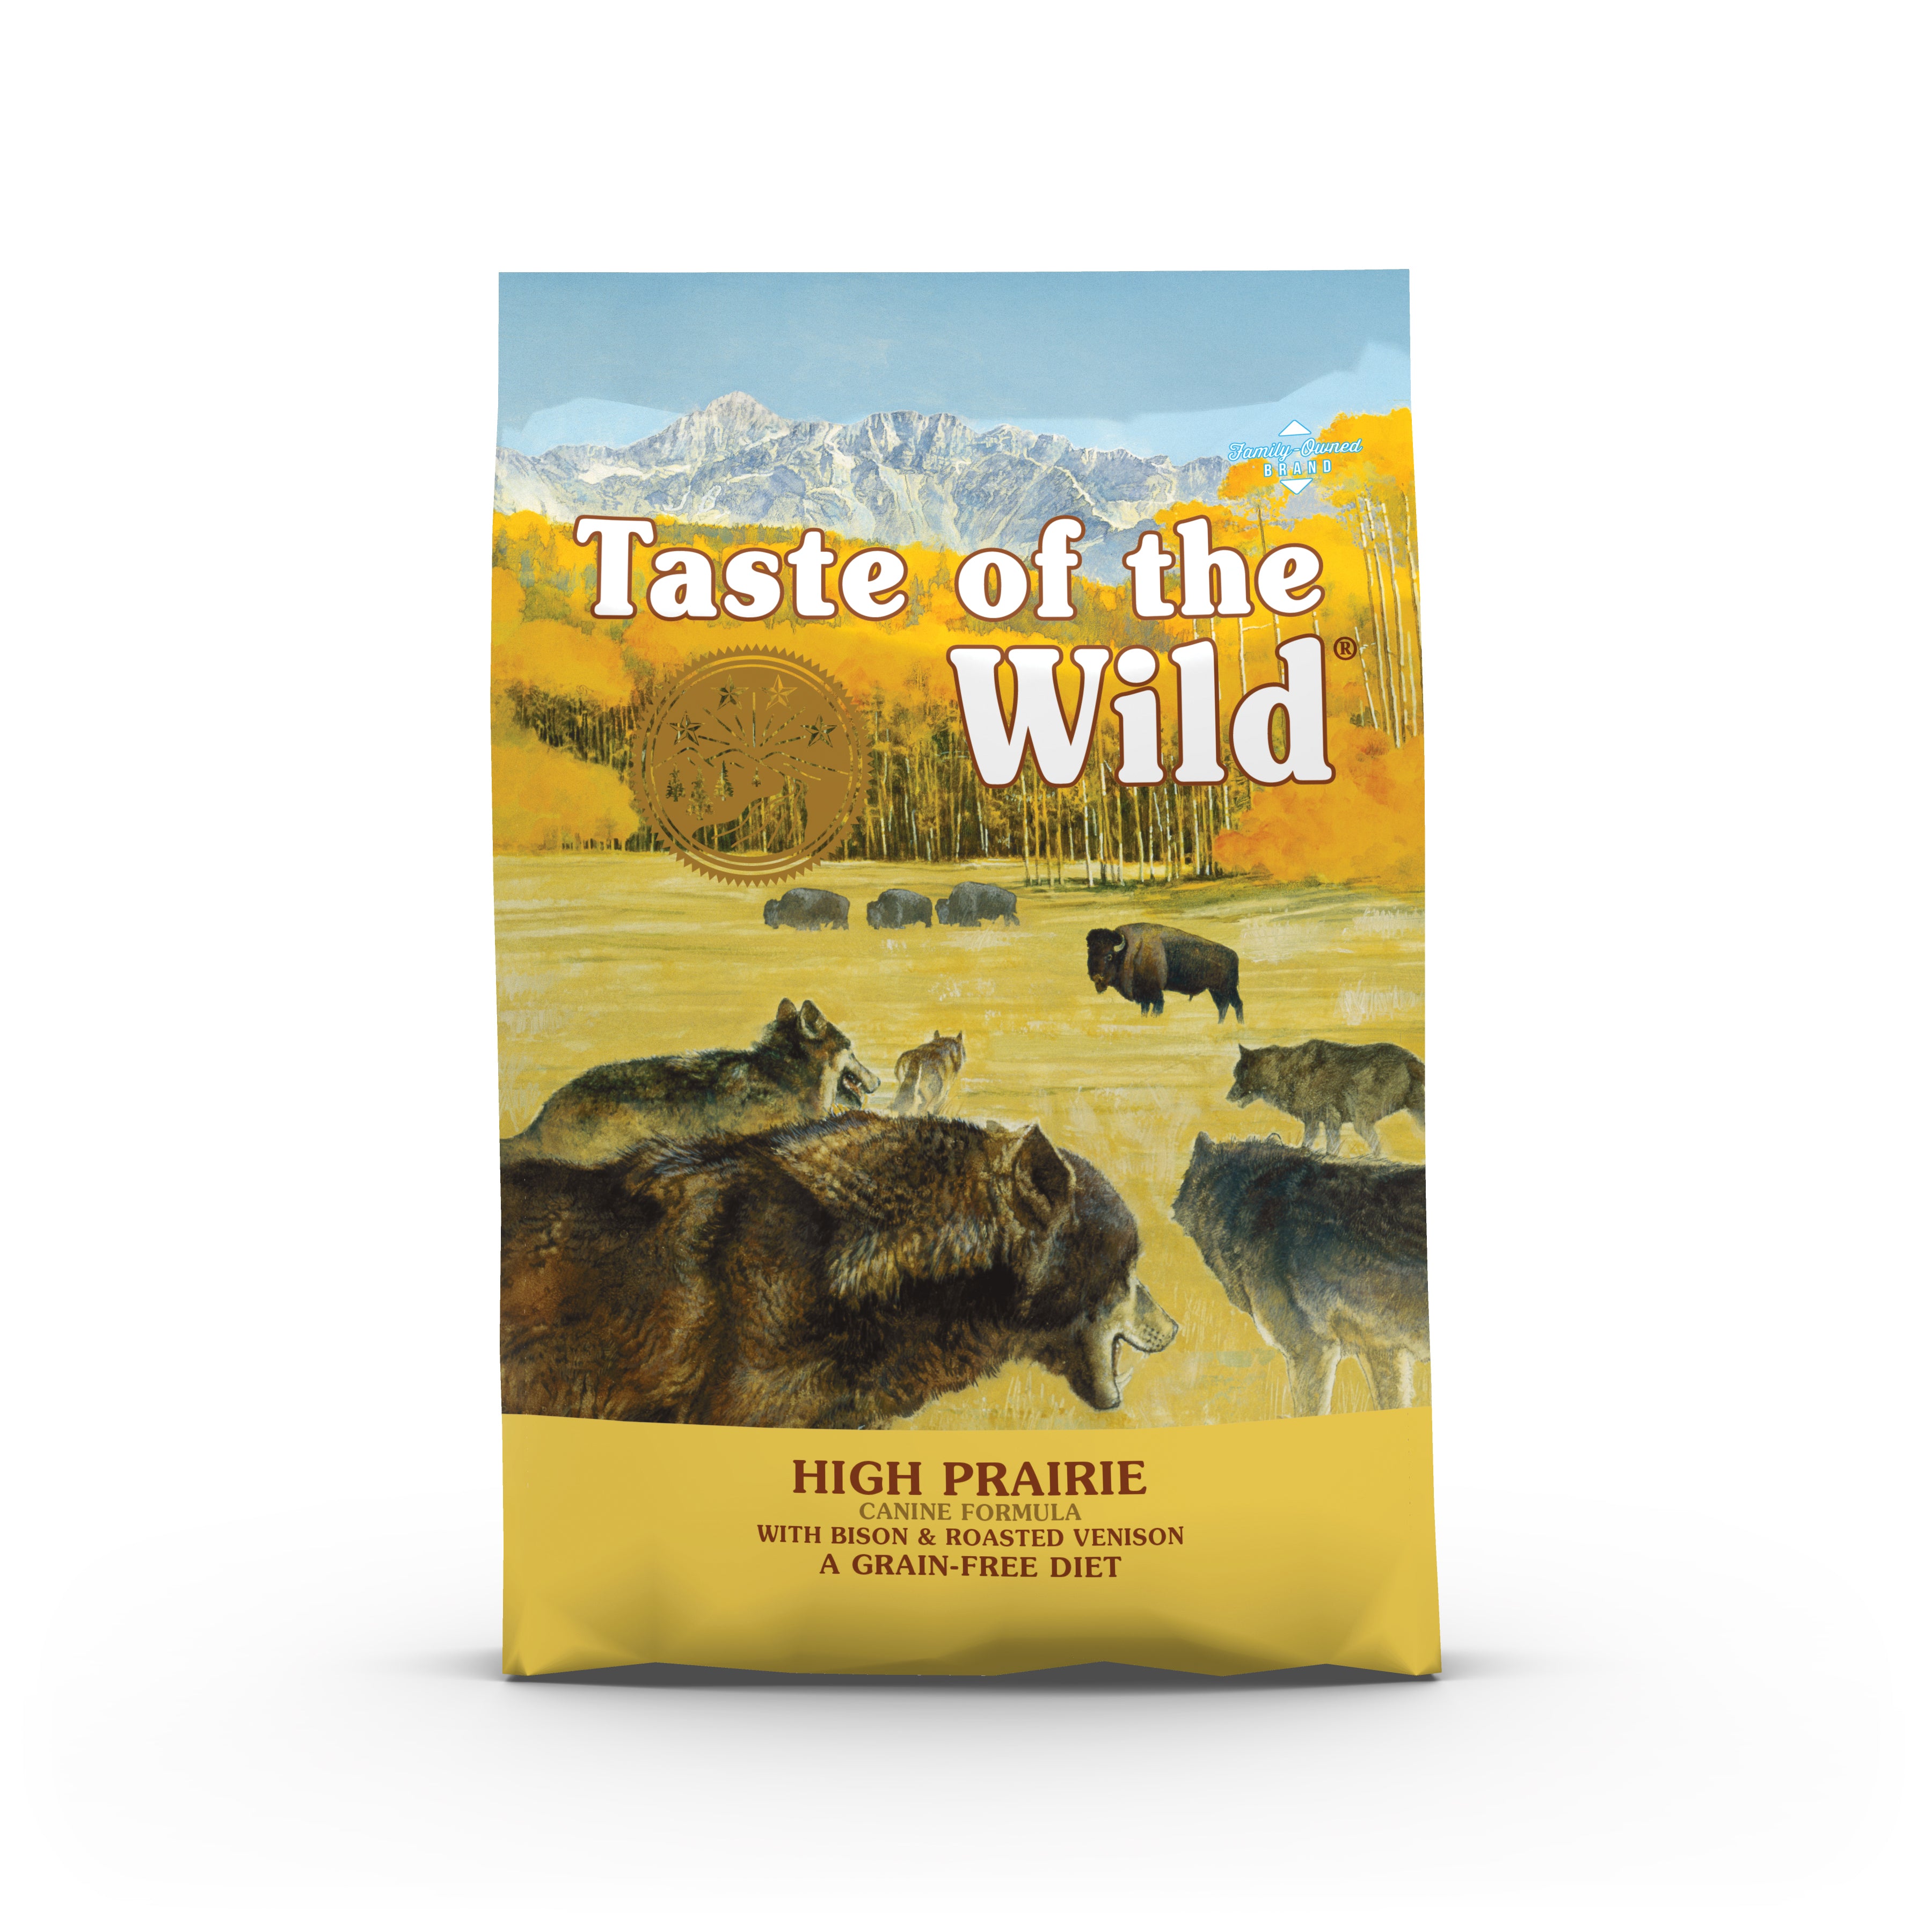 Taste of The Wild - High Prairie Canine Formula with Bison & Roasted Venison